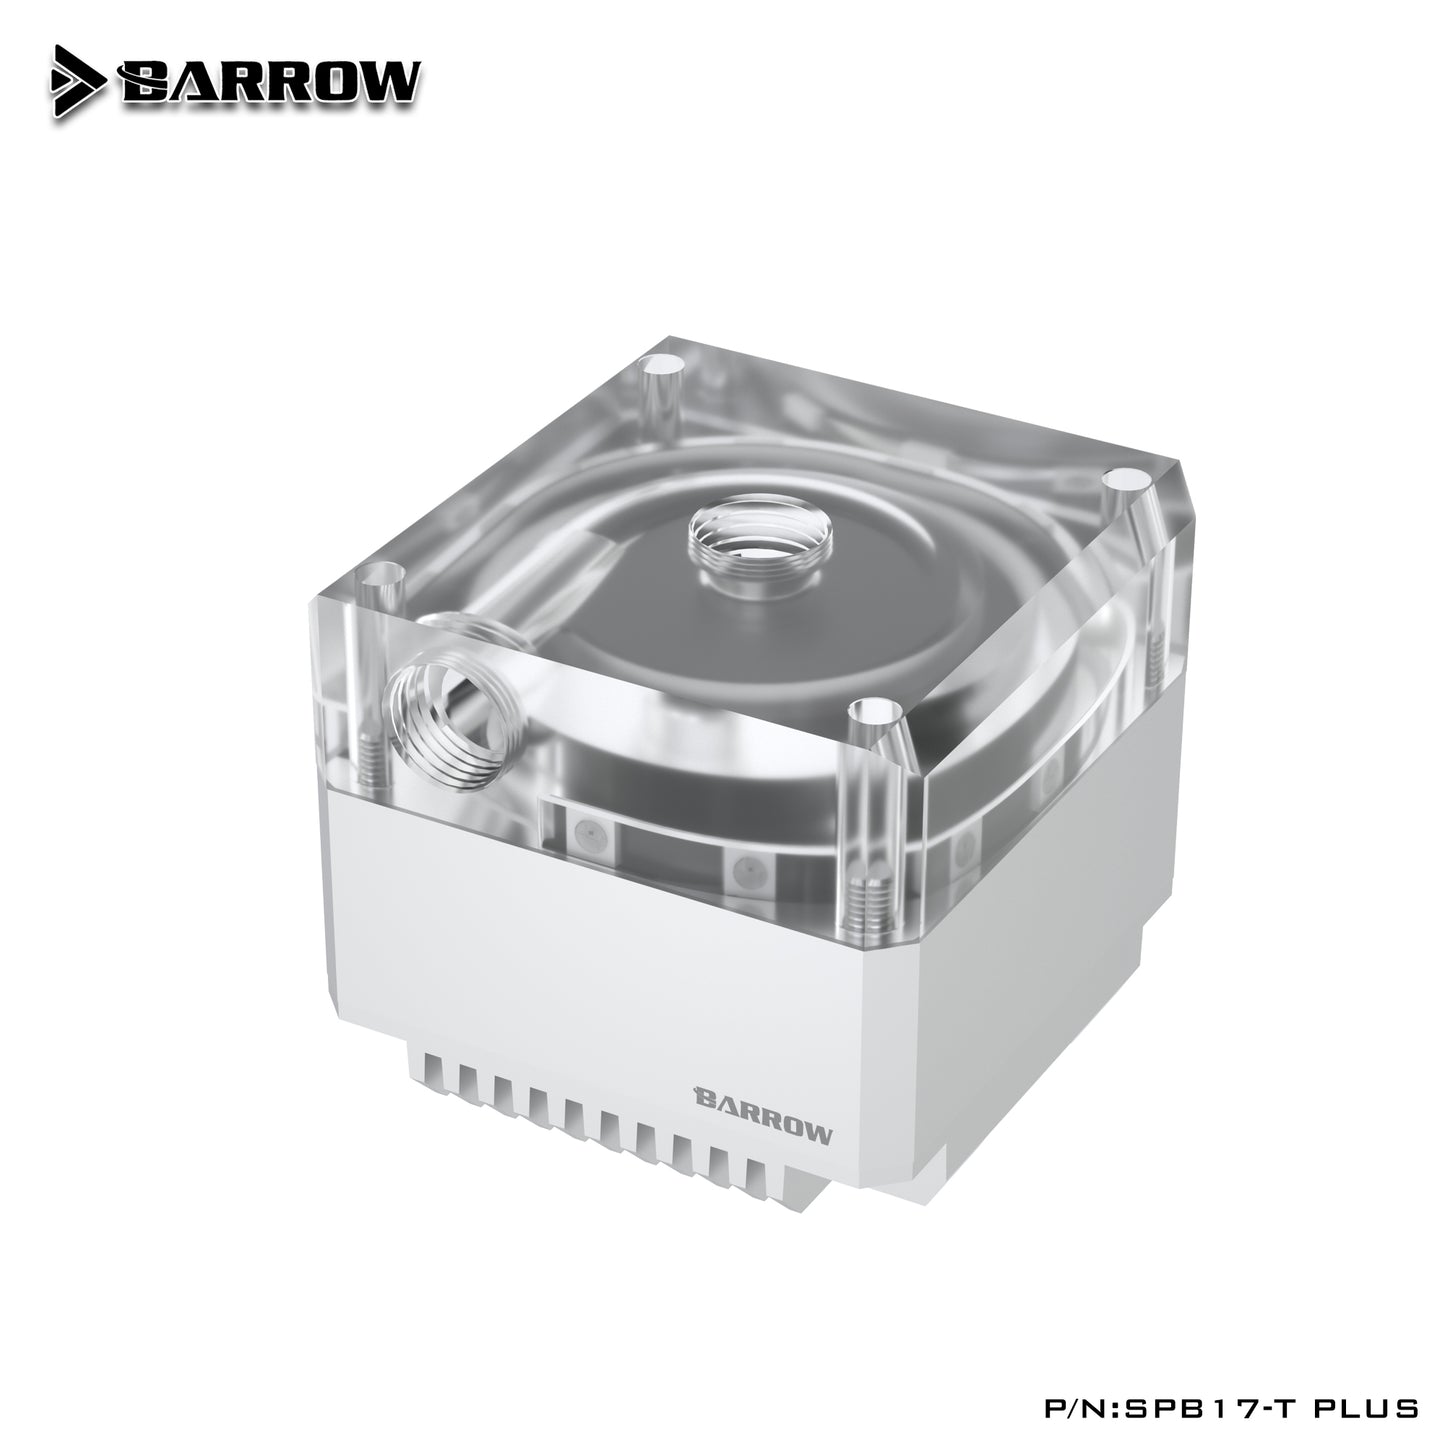 Barrow PLUS Version 17W PWM Pump, With Aluminum Radiator Cover, Special For Barrow Distro Plate, SPB17-T PLUS